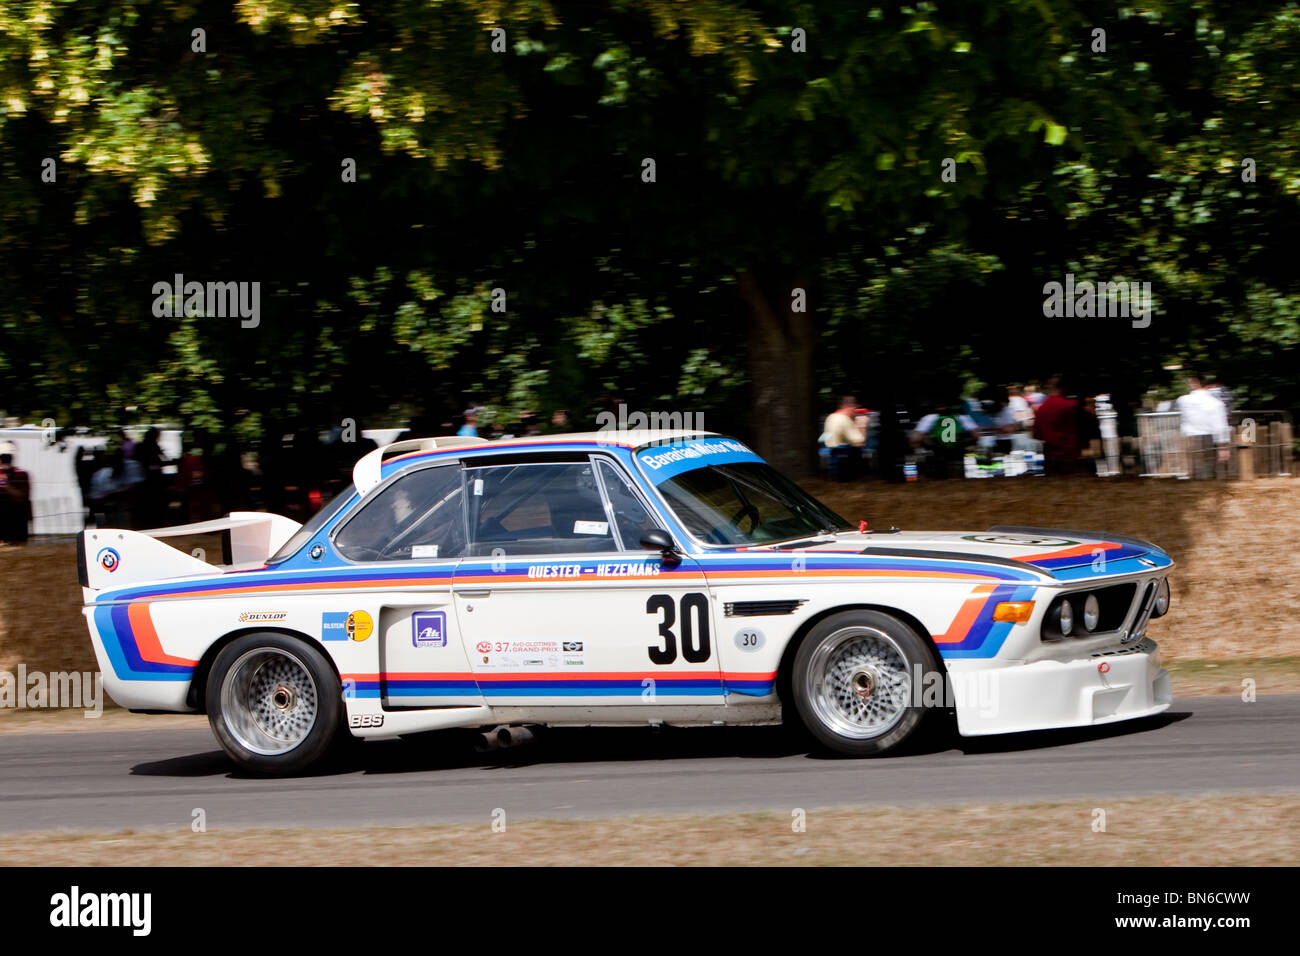 1973 BMW CSL 3.0 Batmobile at the Festival of Speed, Goodwood, 2010 Stock Photo